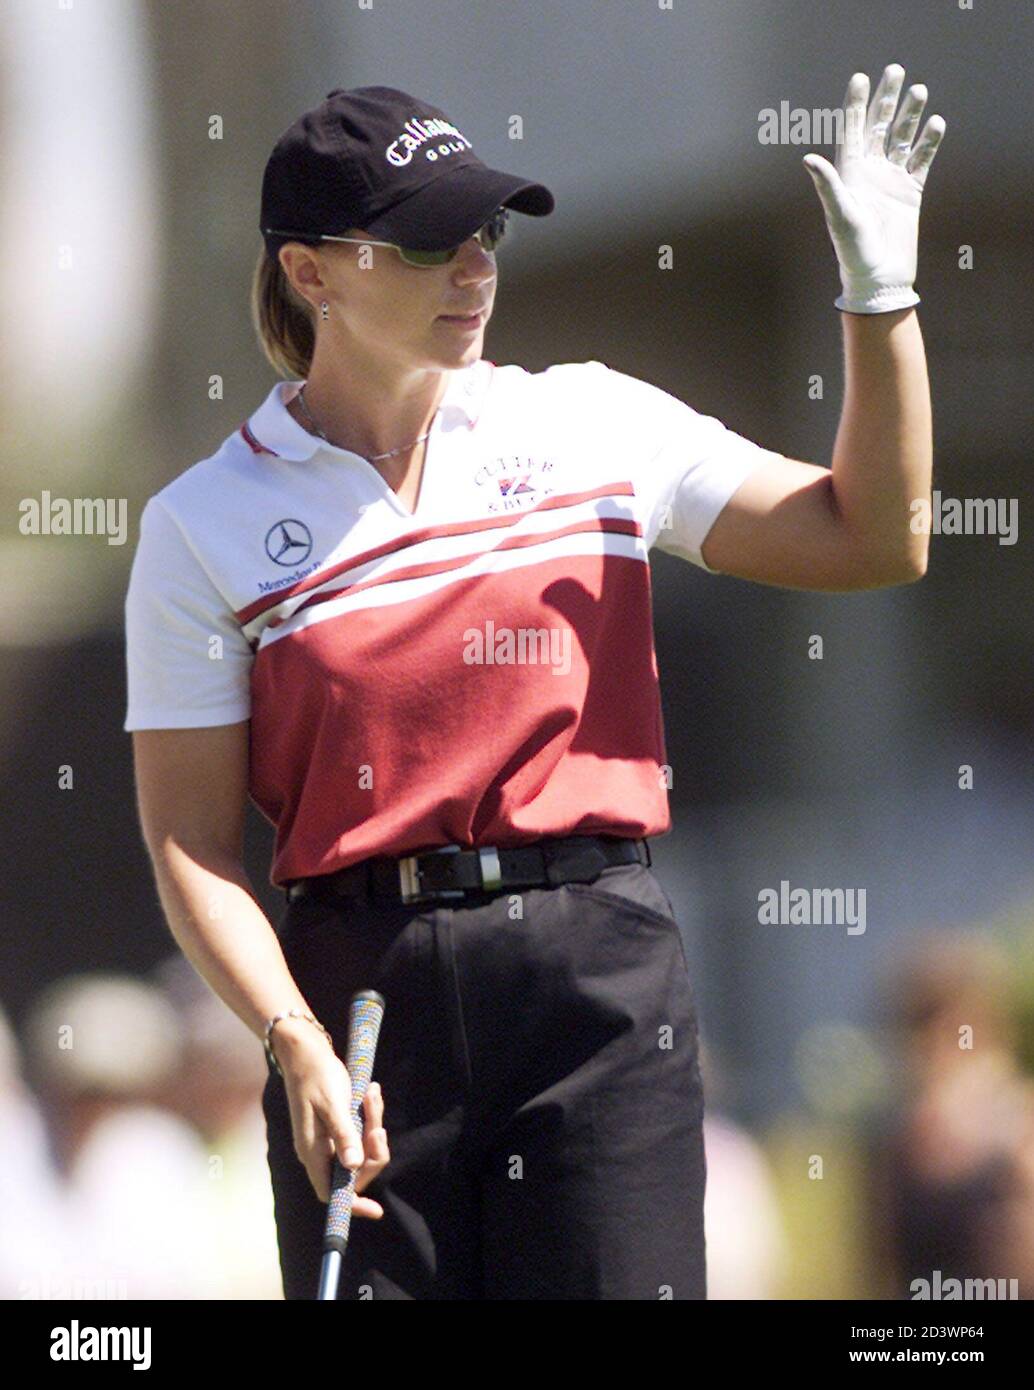 Annika Sorenstam, of Stockholm, Sweden, acknowledges the crowd on the tenth  tee before starting her first round of the Safeway Ping Tournament in  Phoenix, Arizona, March 20, 2003. Sorenstam is competing in